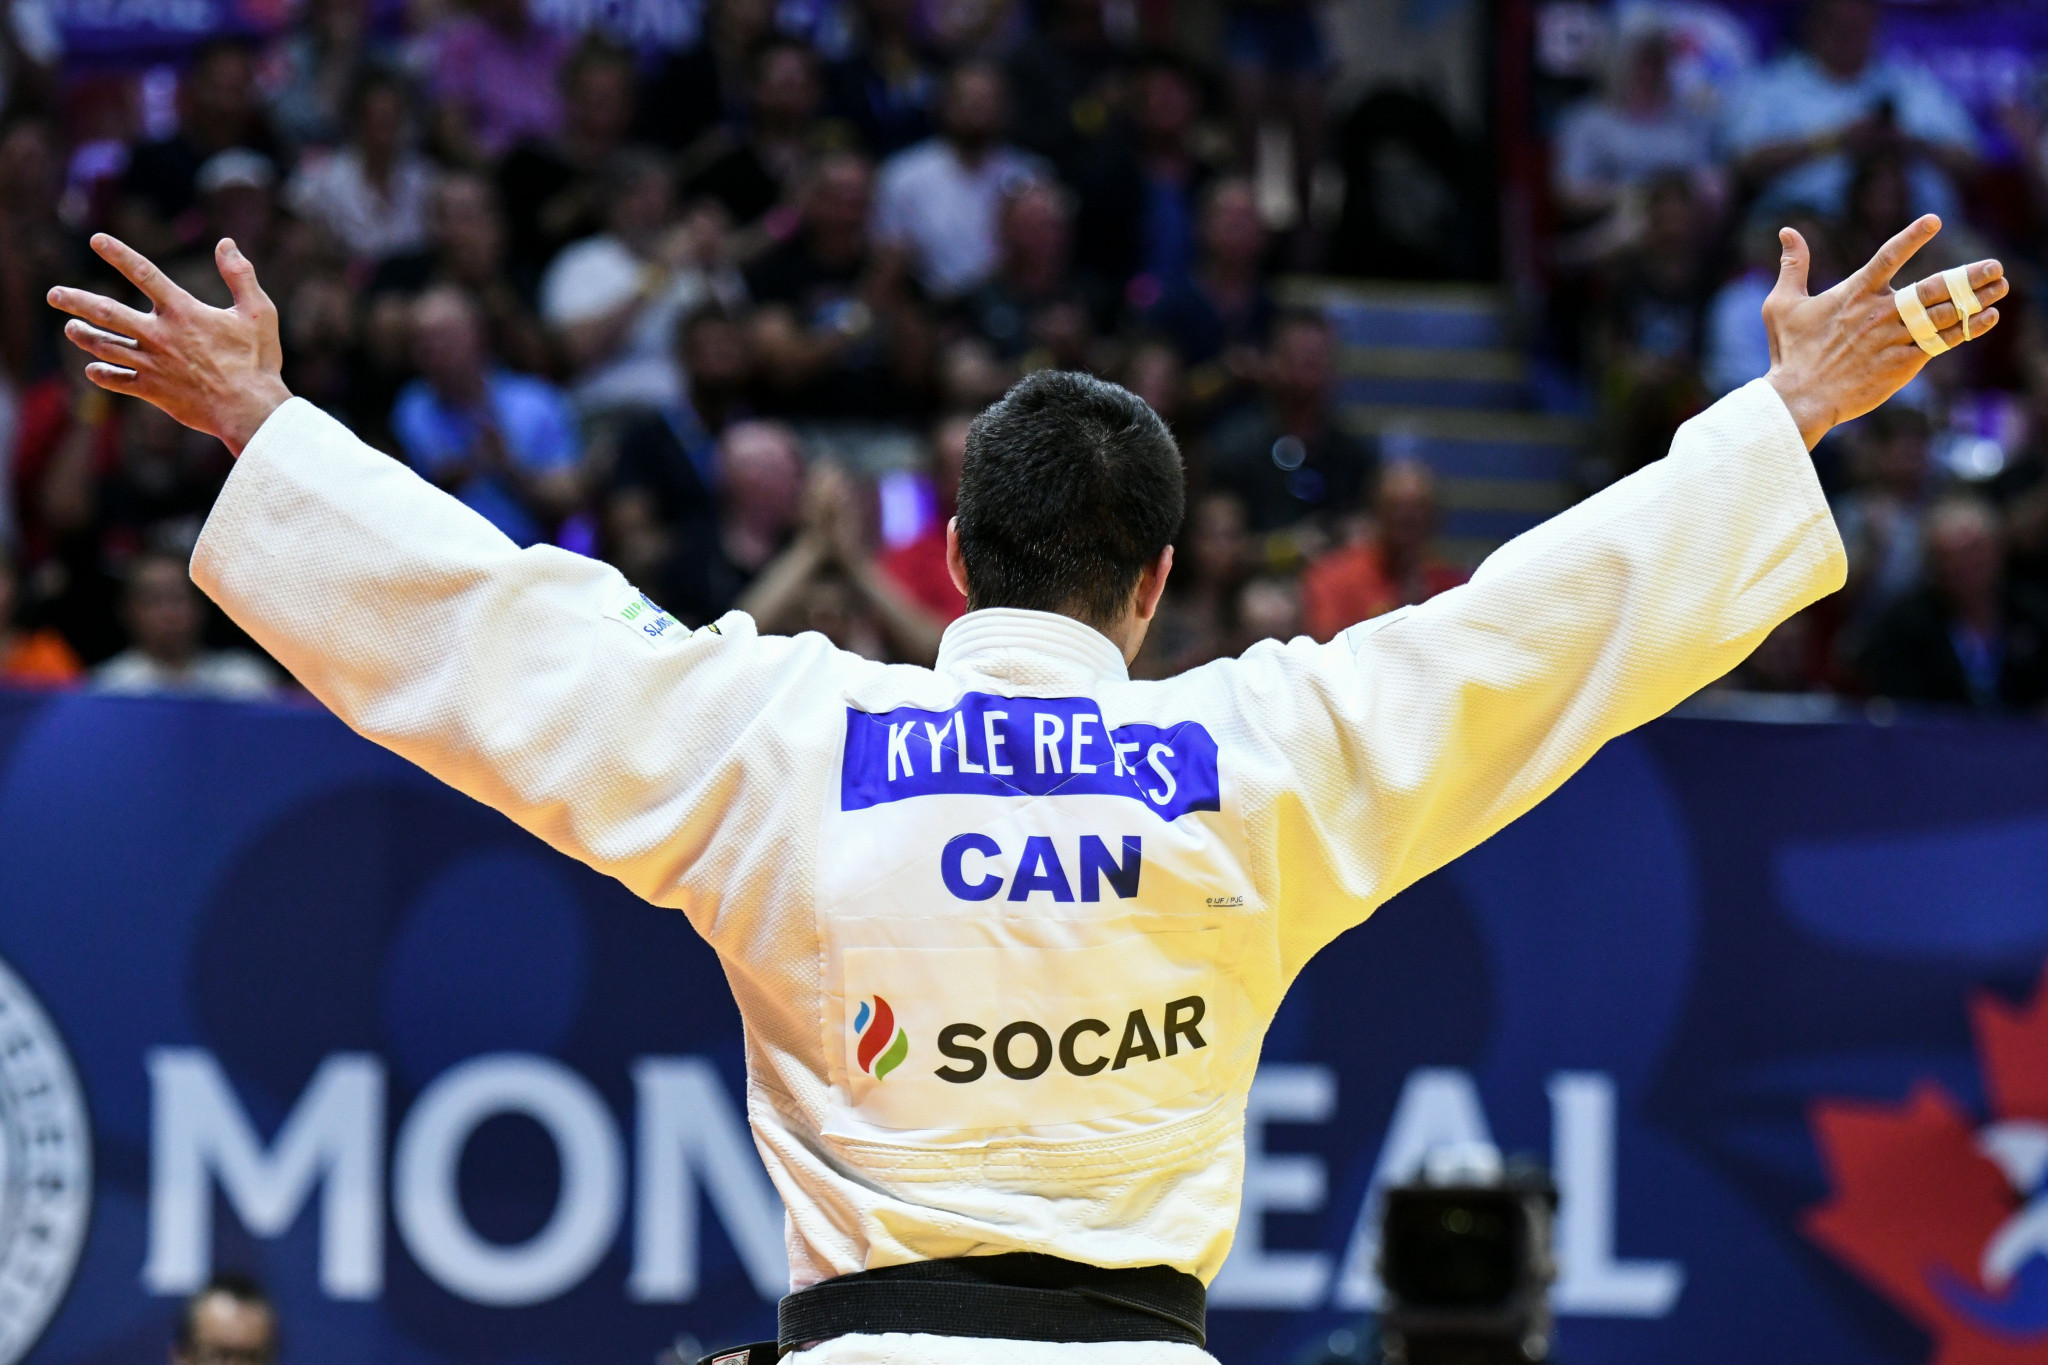 Kyle Reyes gave Canada the country's only gold medal of the Pan American Judo Championships ©Getty Images